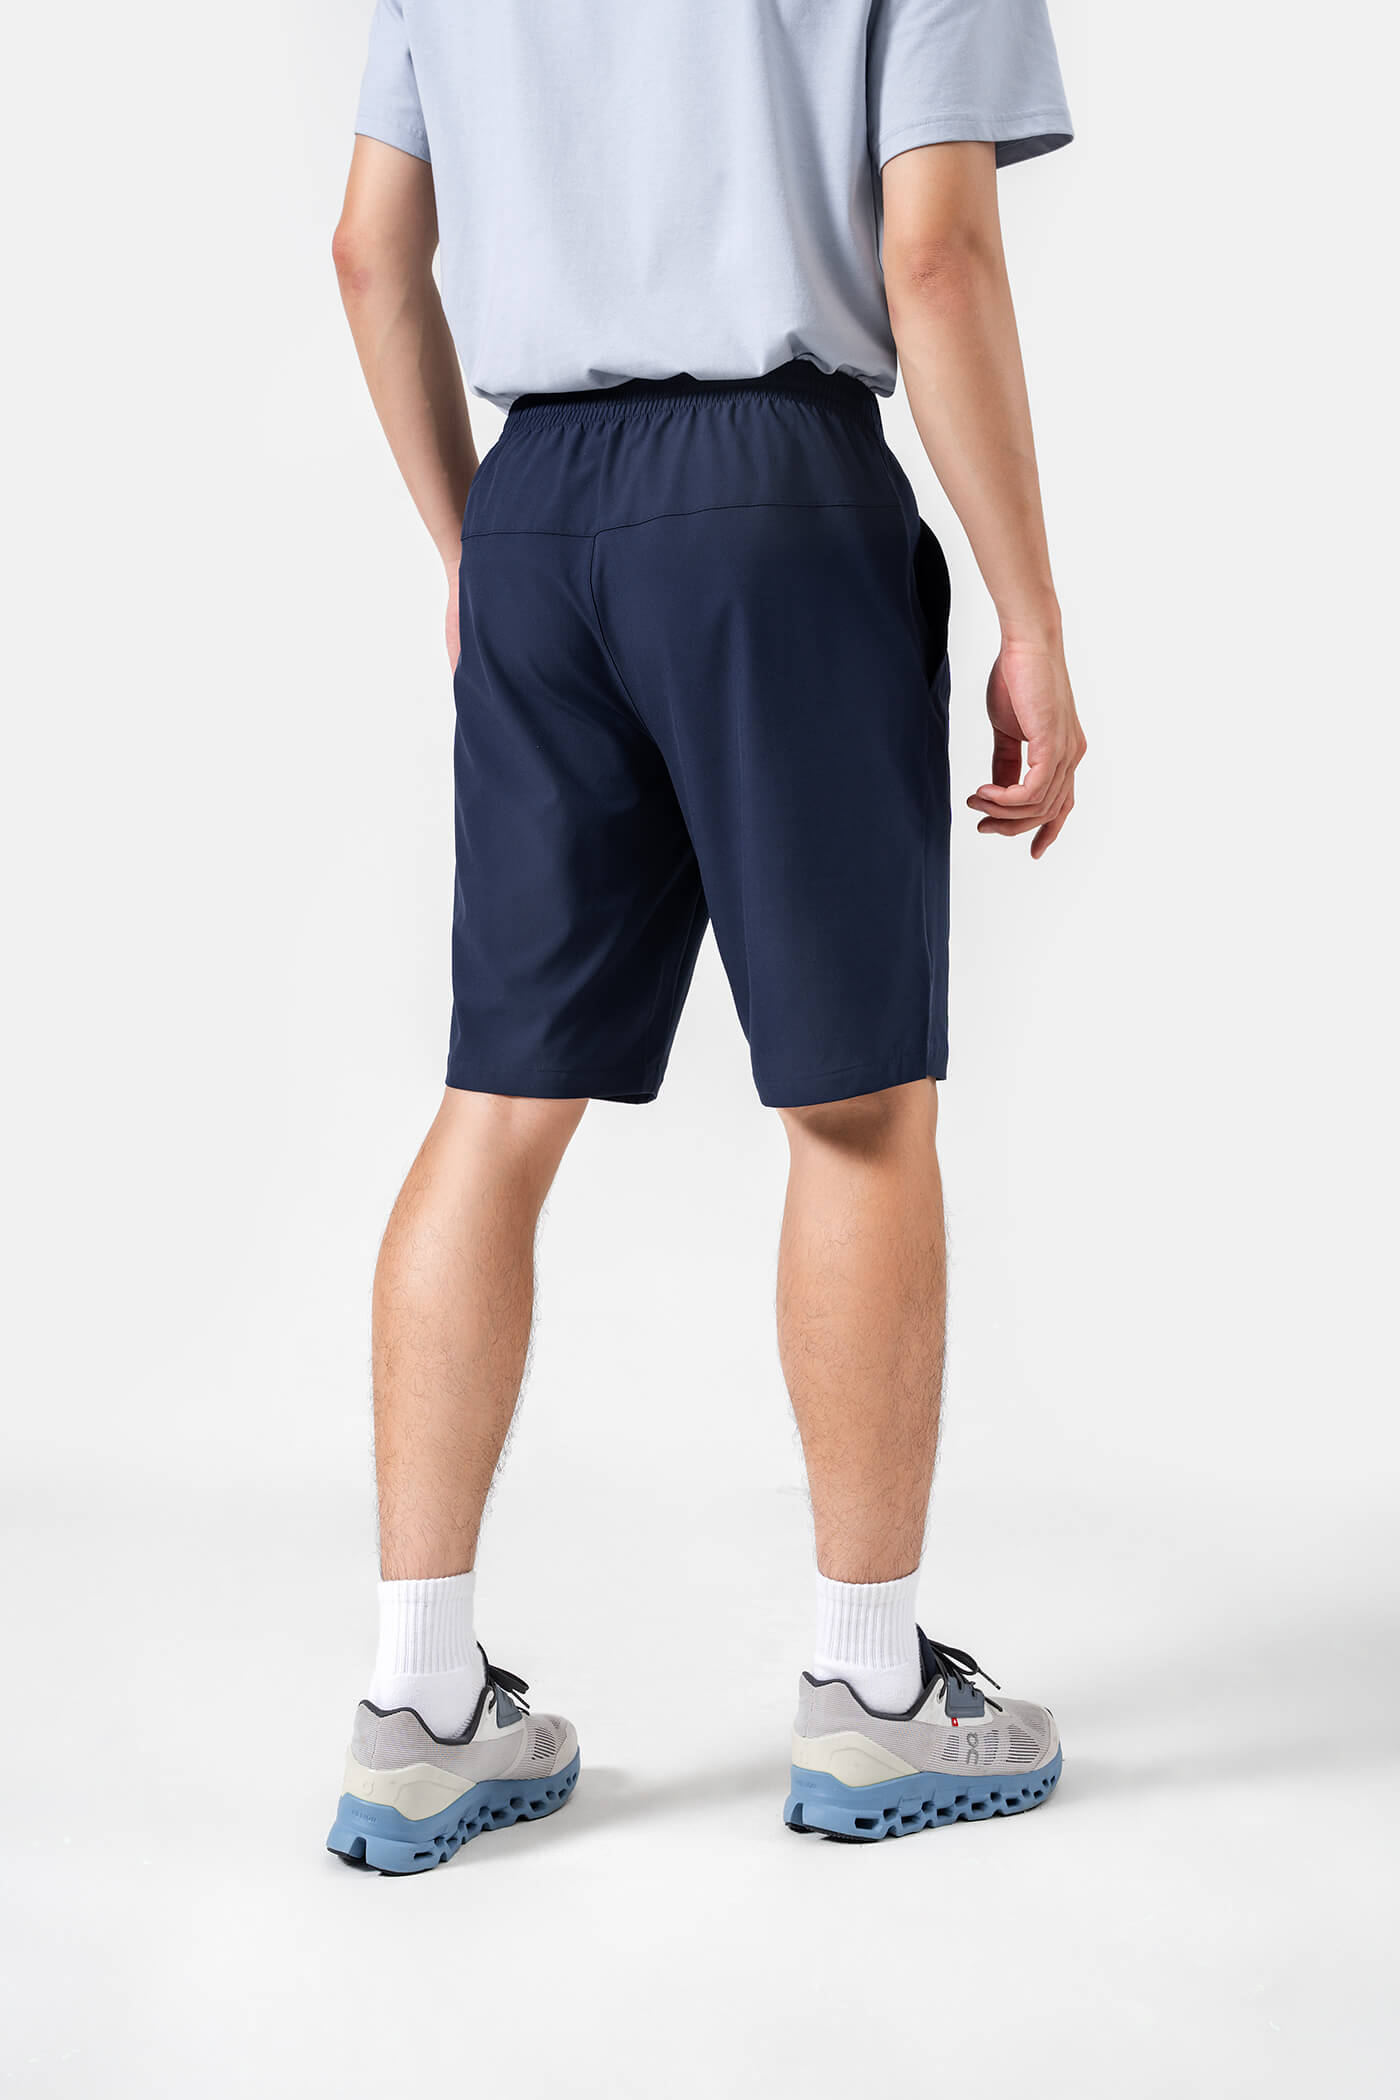 Shorts thể thao 9"  2